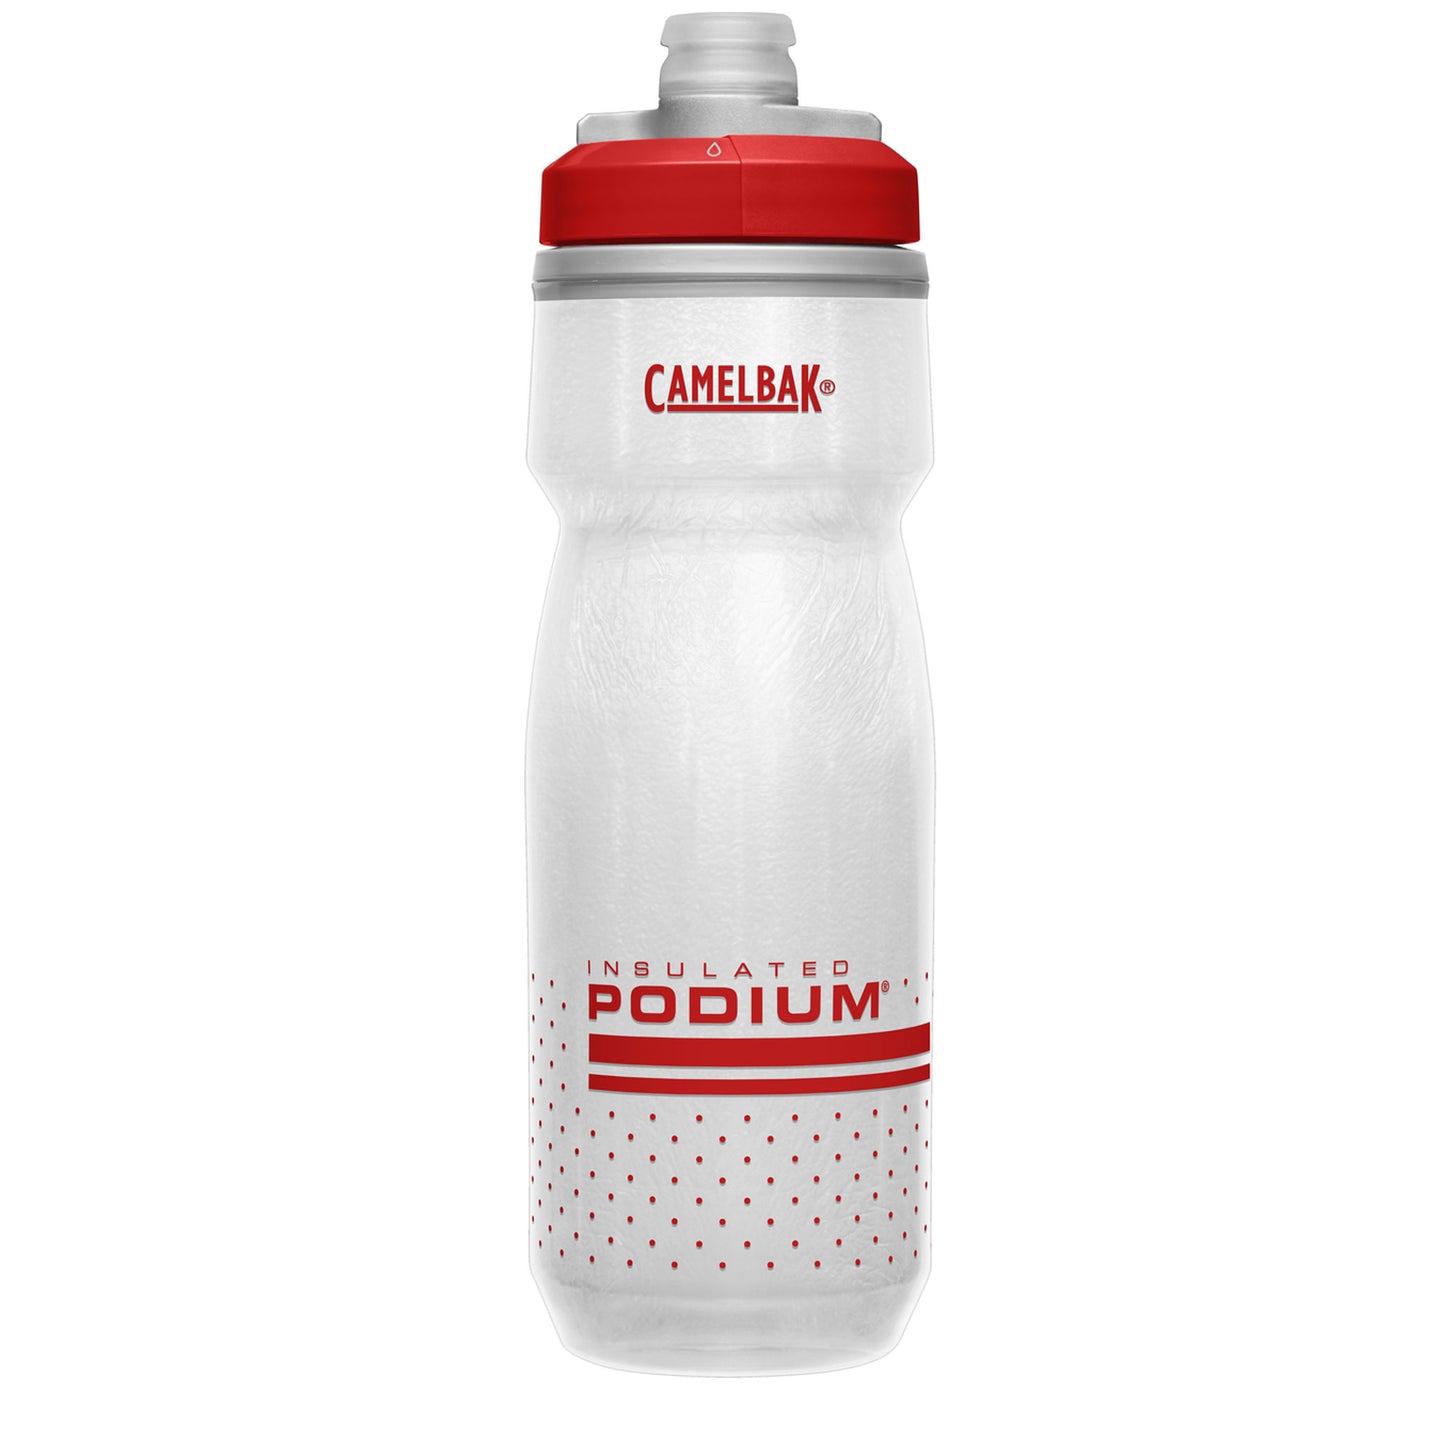 Camelbak Podium Chill 600ml, Fiery Red/White buy online at Woolys Wheels Sydney